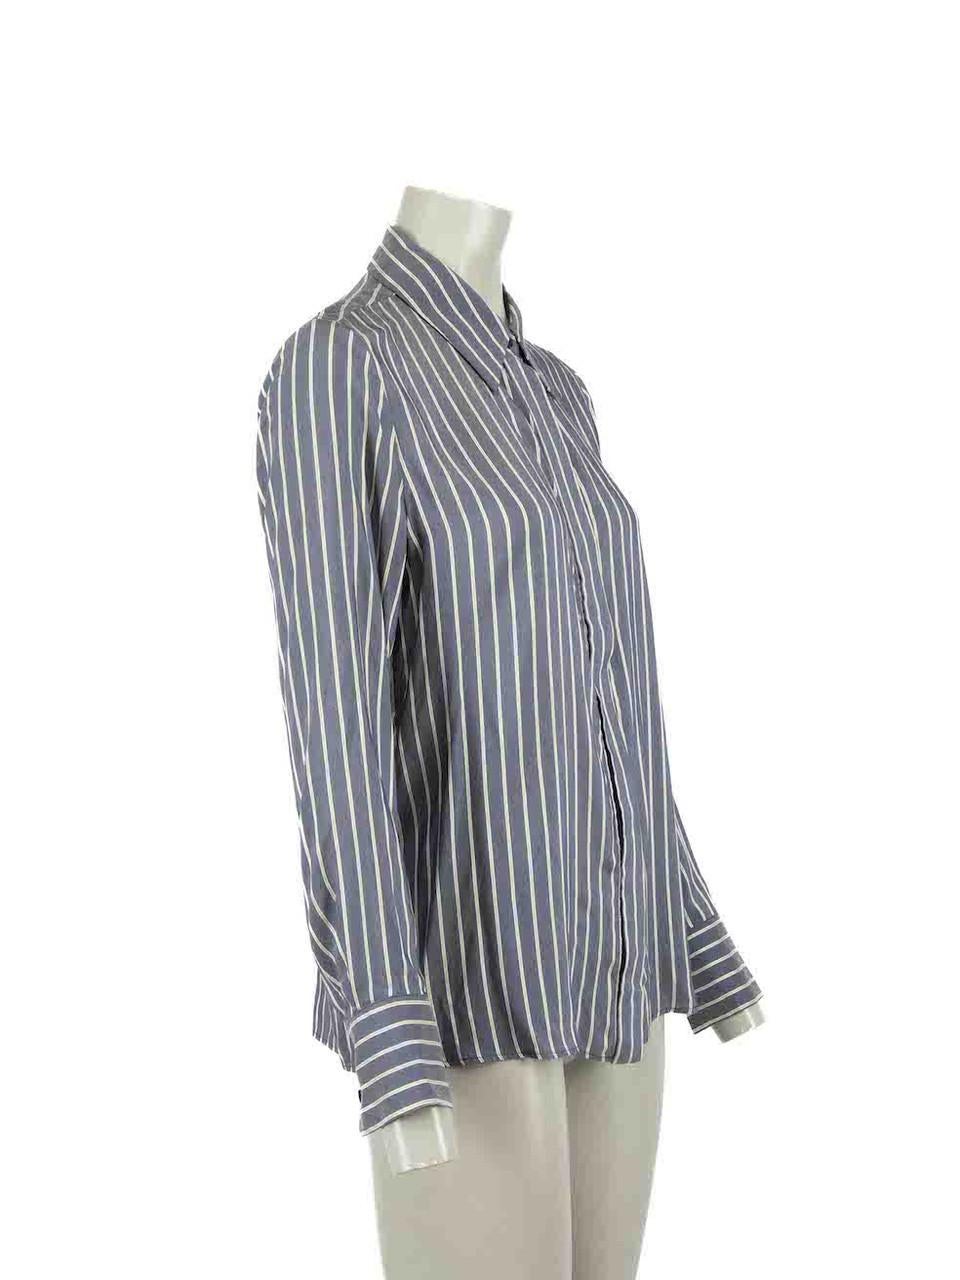 CONDITION is Very good. Minimal wear to is evident. Minimal wear to fabric composition with a handful of very small pulls to the weave at the collar on this used Max Mara Studio designer resale item.

Details
Blue
Viscose
Long sleeves shirt
Striped